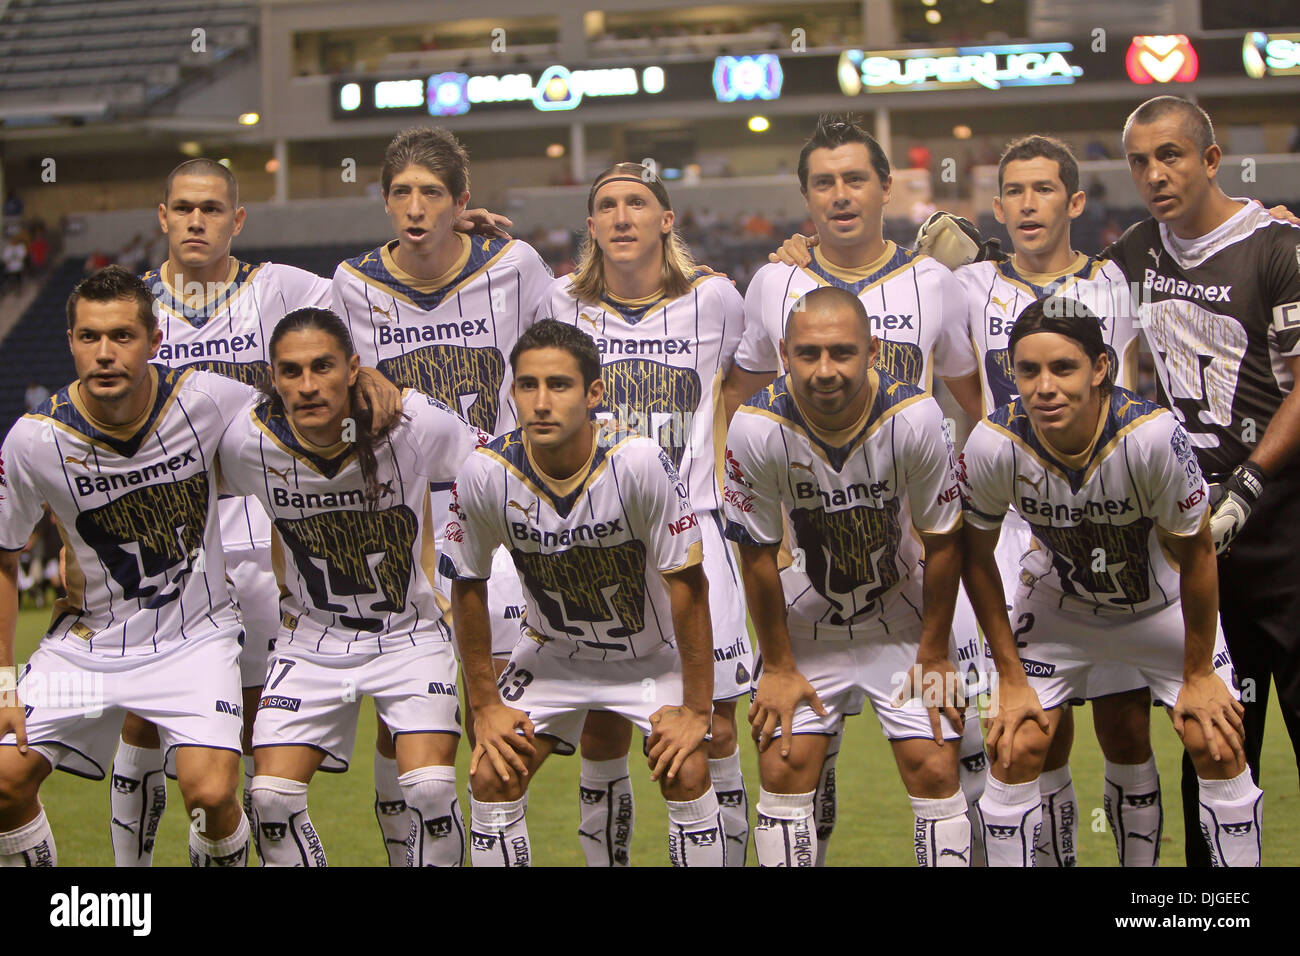 July 20, 2010 - Bridgeview, IL, USA - 20 July 2010: Pumas UNAM team photo befreo the start of the SuperLiga match  between Pumas UNAM and the Chicago Fire at Toyota Park in Bridgeview, IL. The Fire defeated Pumas UNAM 1-0. Mandatory Credit: Geoffrey Siehr / Southcreek Global (Credit Image: © Southcreek Global/ZUMApress.com) Stock Photo